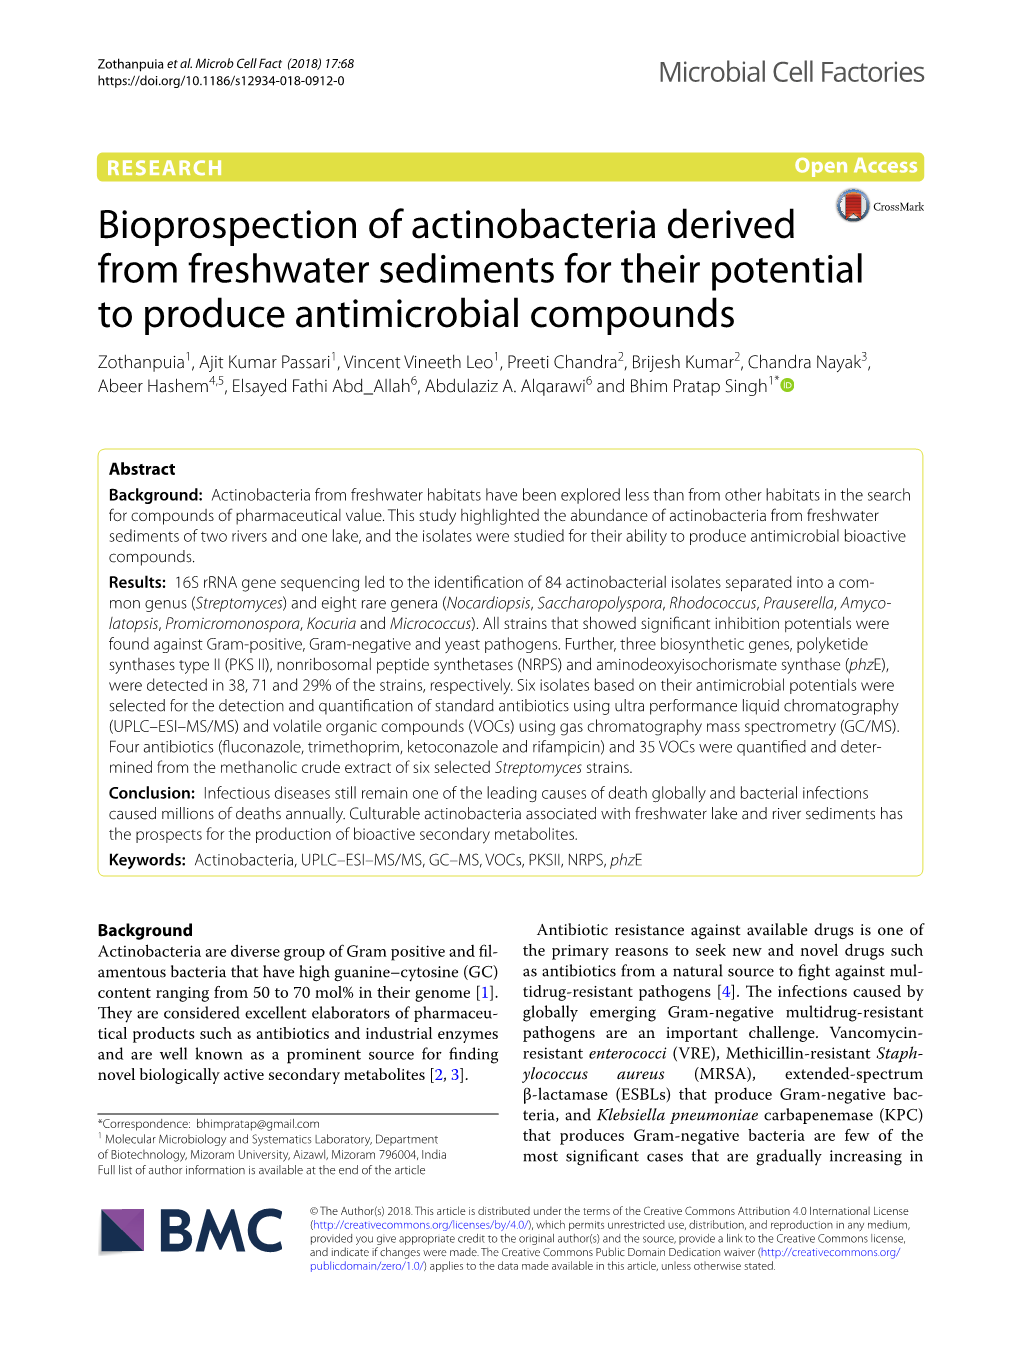 Bioprospection of Actinobacteria Derived from Freshwater Sediments